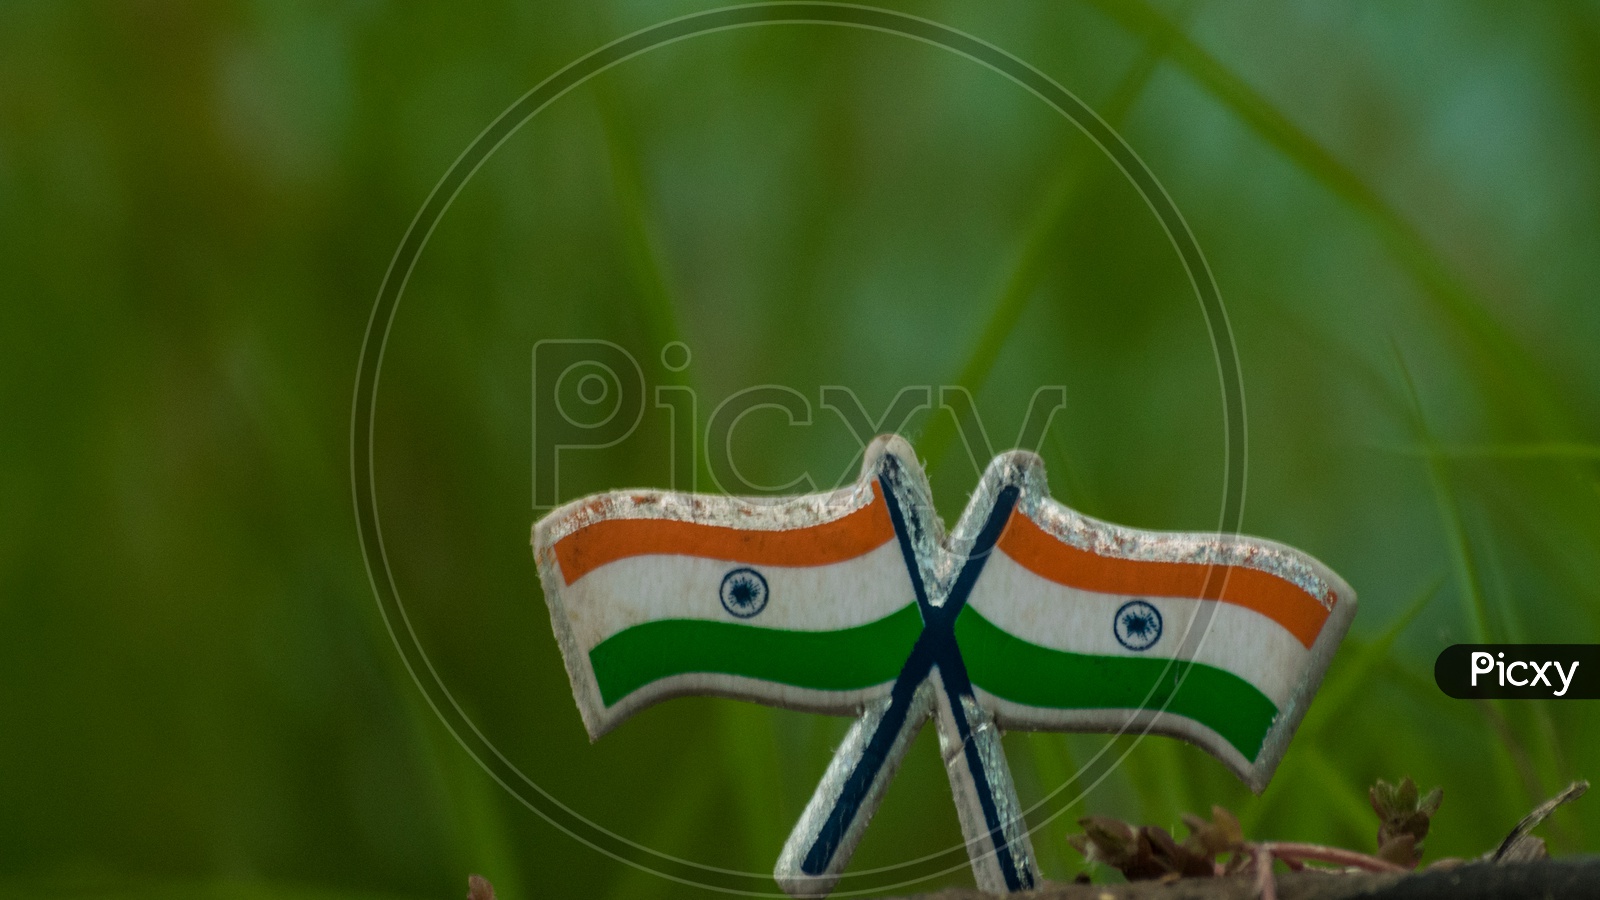 My Country Flag - INDIA